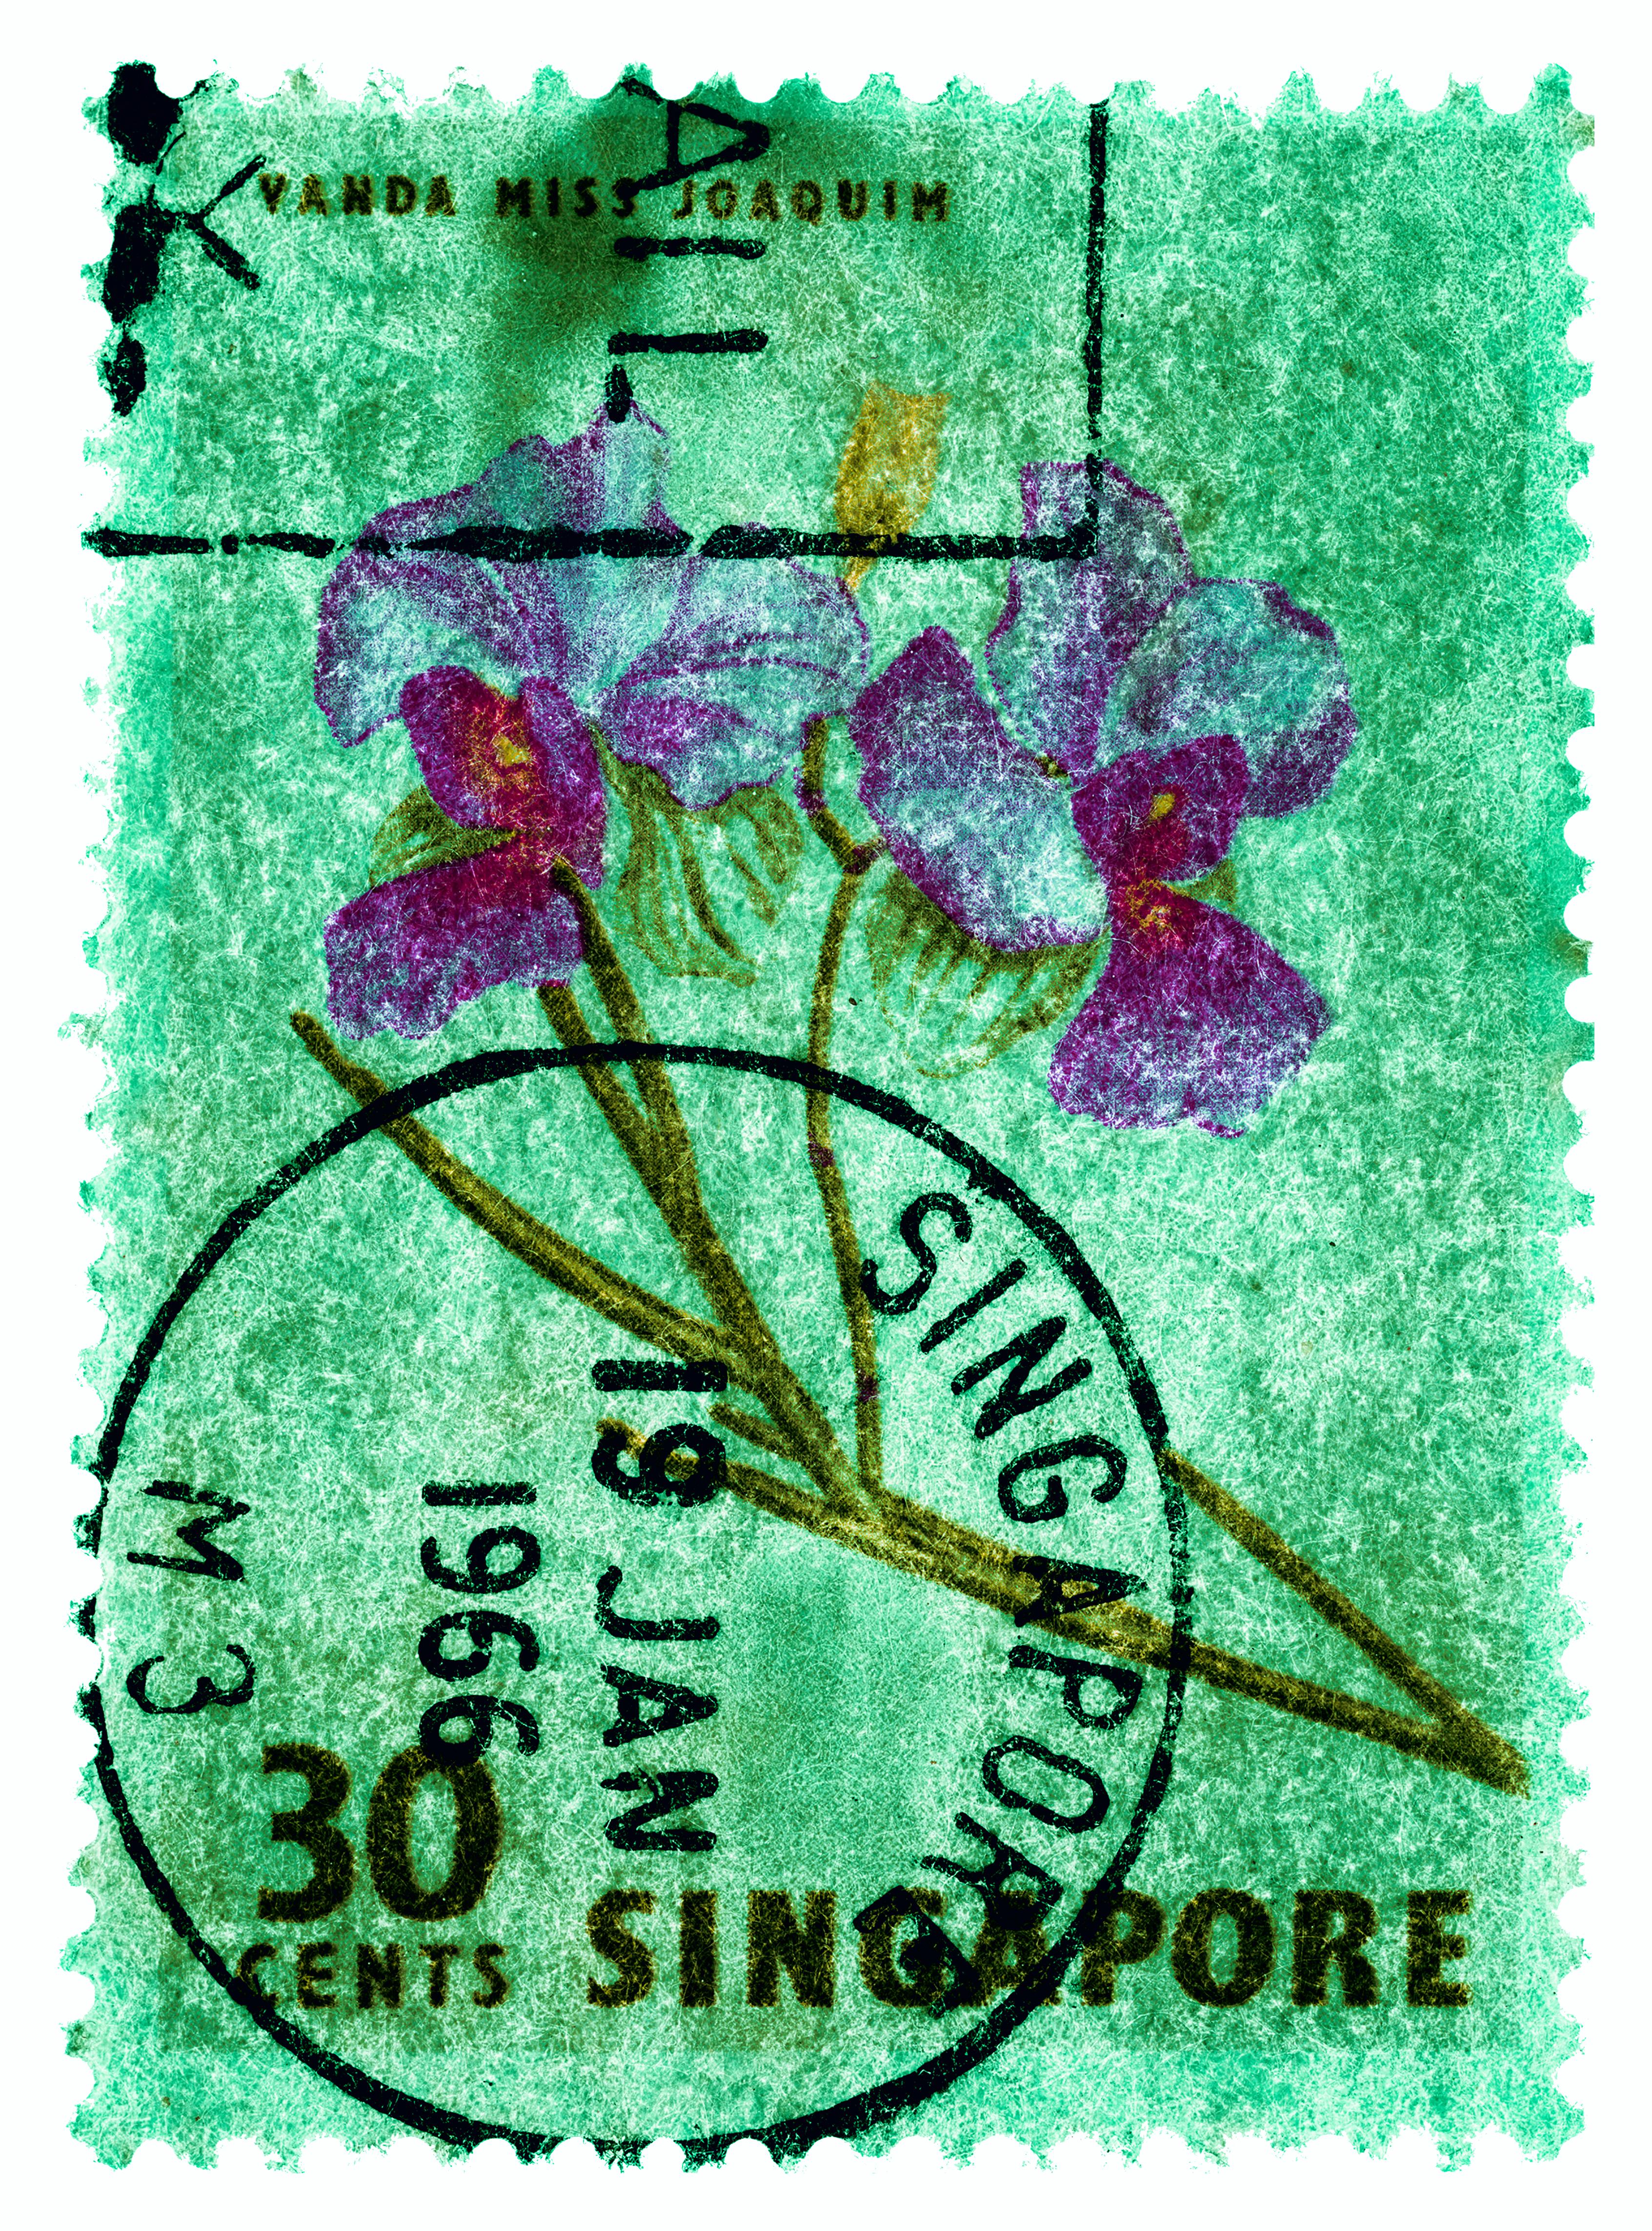 30 Cents Singapore Orchid, from the Heidler & Heeps Stamp Collection.
These historic postage stamps that make up the Heidler & Heeps Stamp Collection, Singapore Series 'Postcards from Afar' have been given a twenty-first century pop art lease of